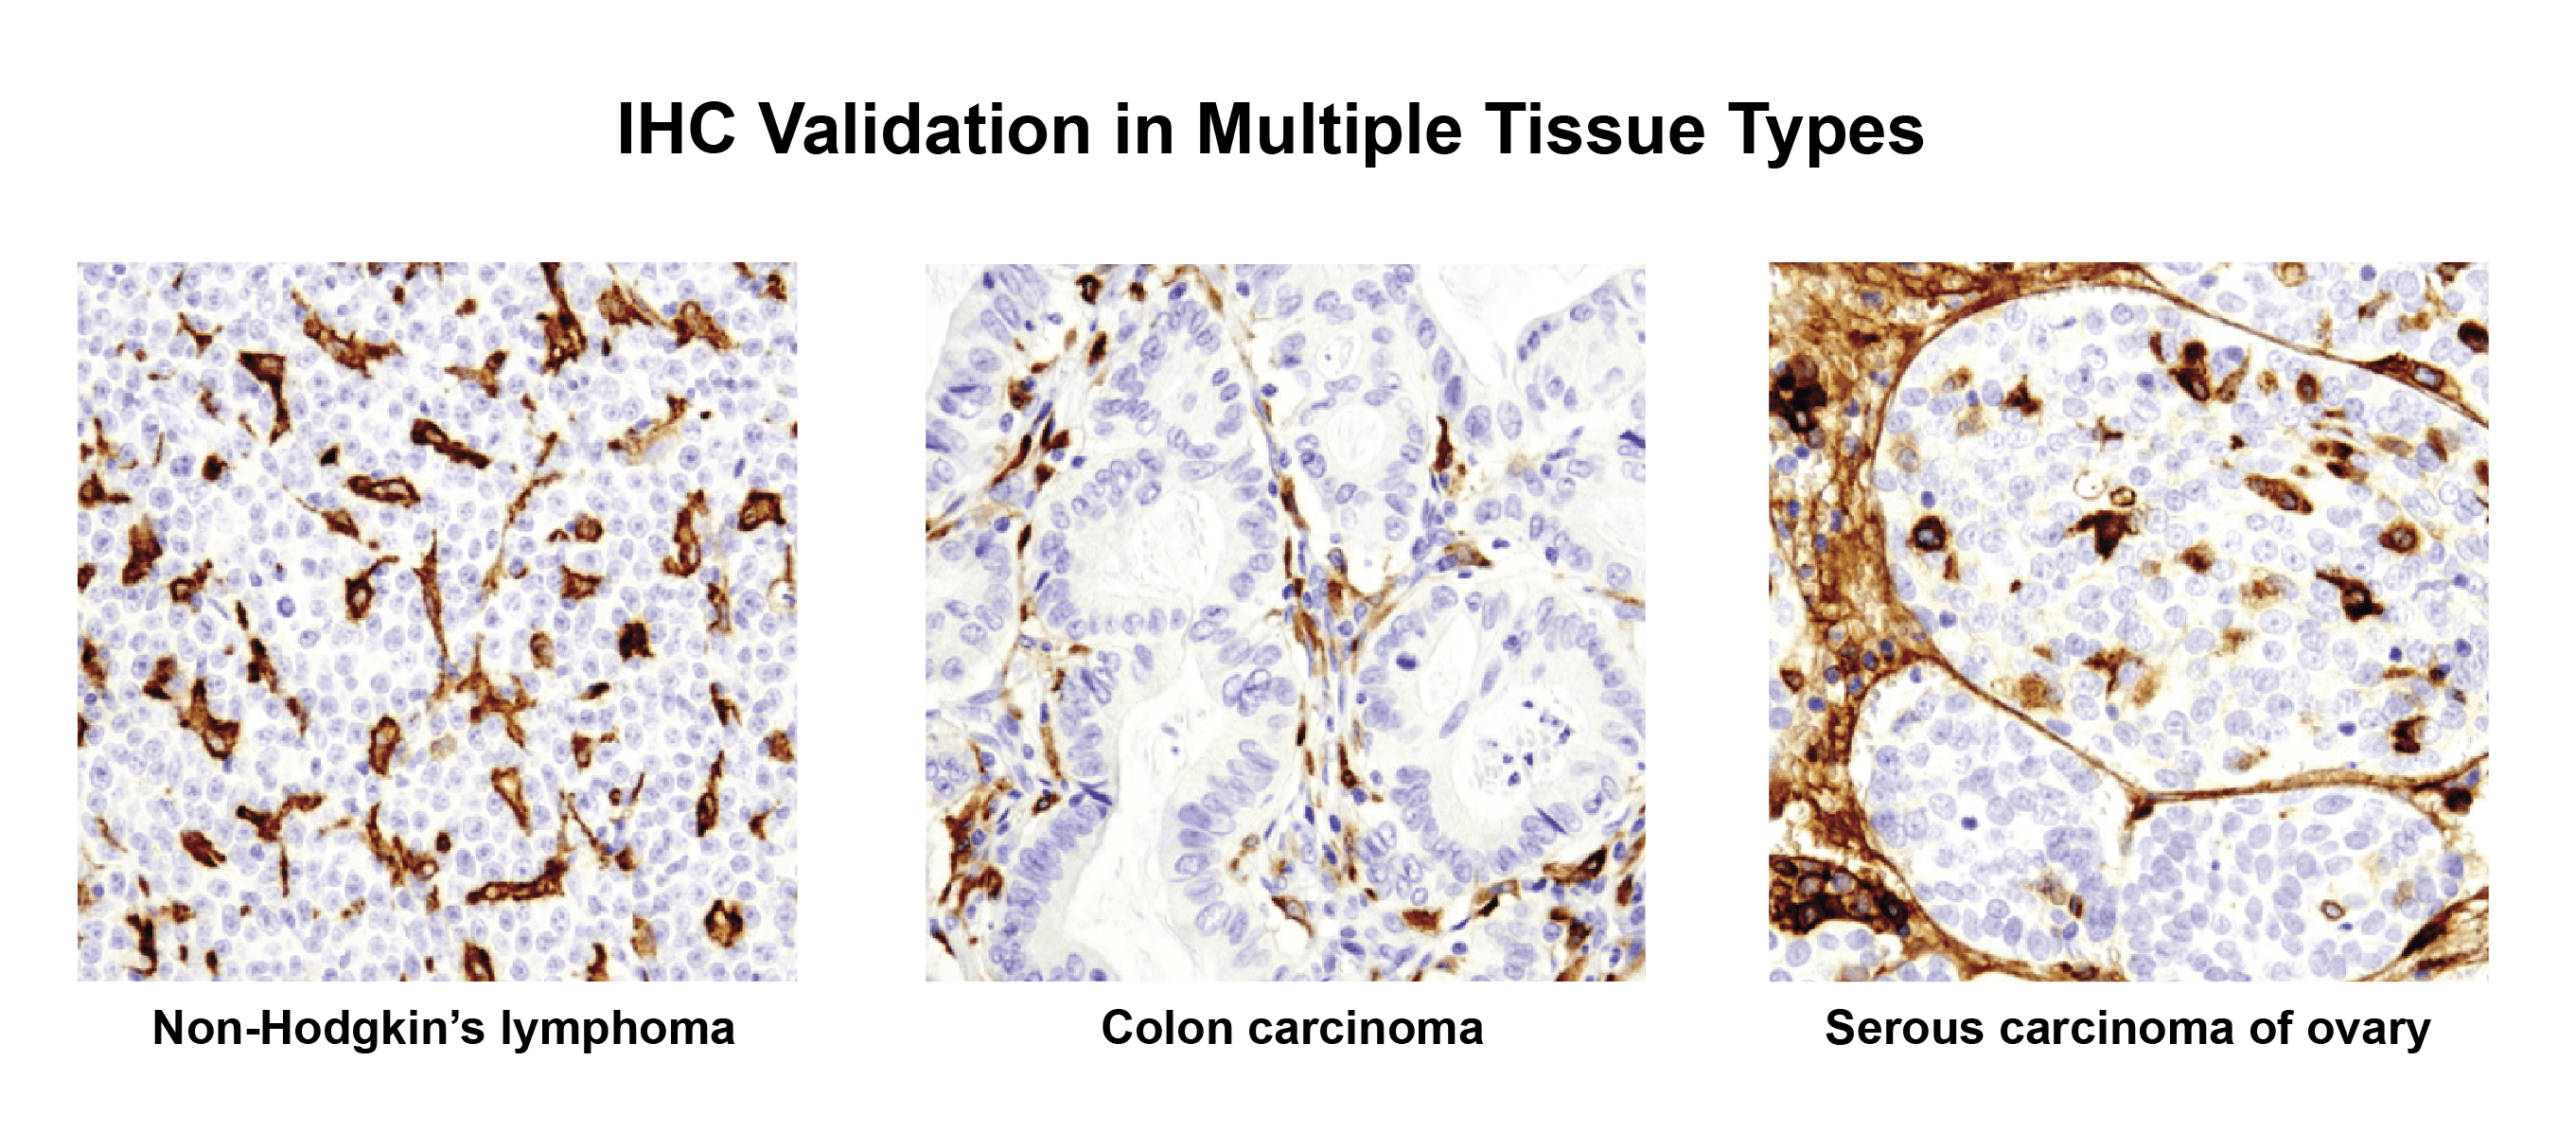 Ab validation in multiple tissue types 01